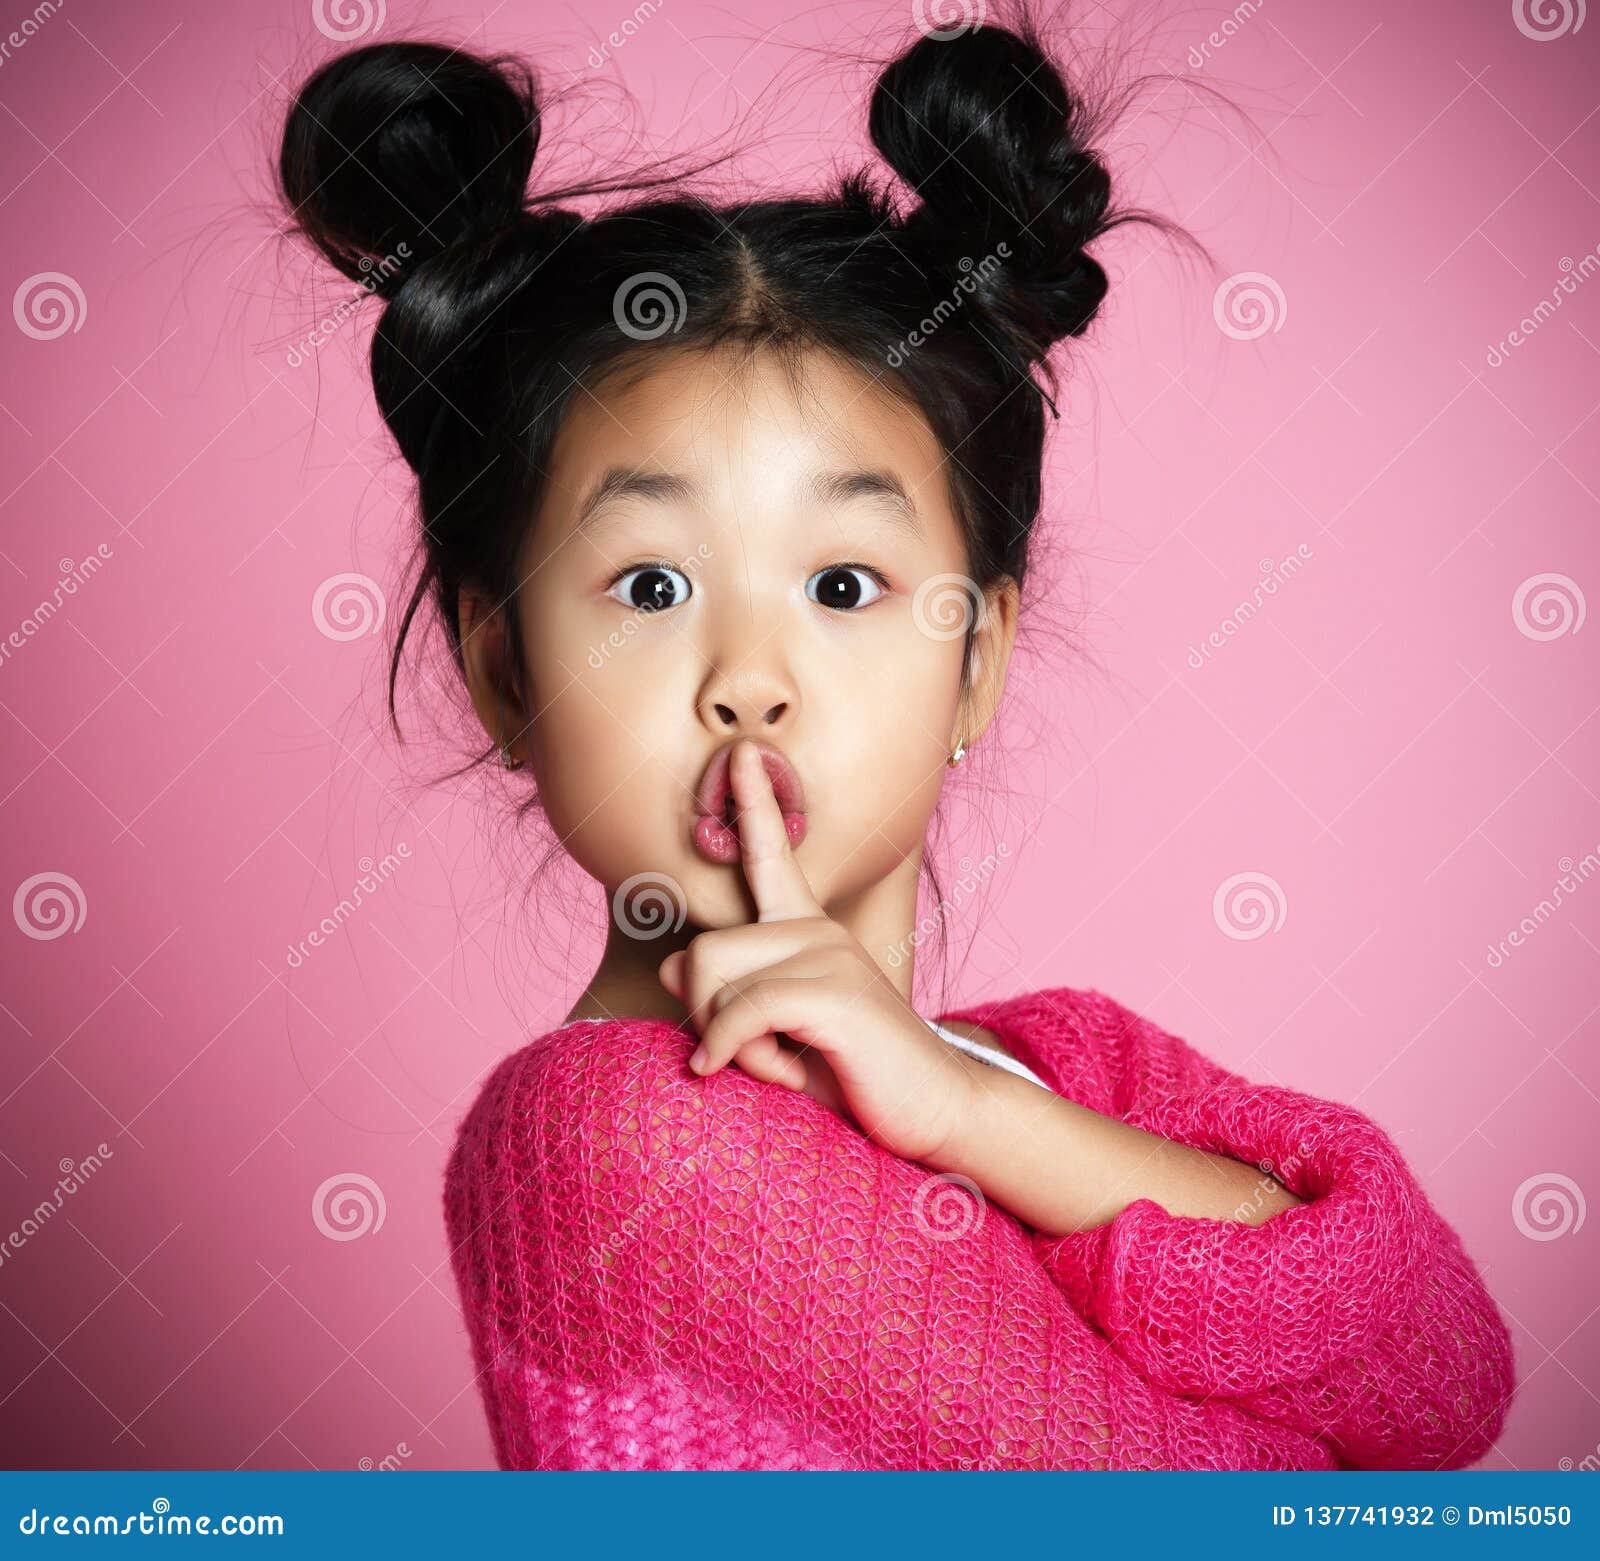 asian kid girl in pink sweater shows shh sign close up portrait